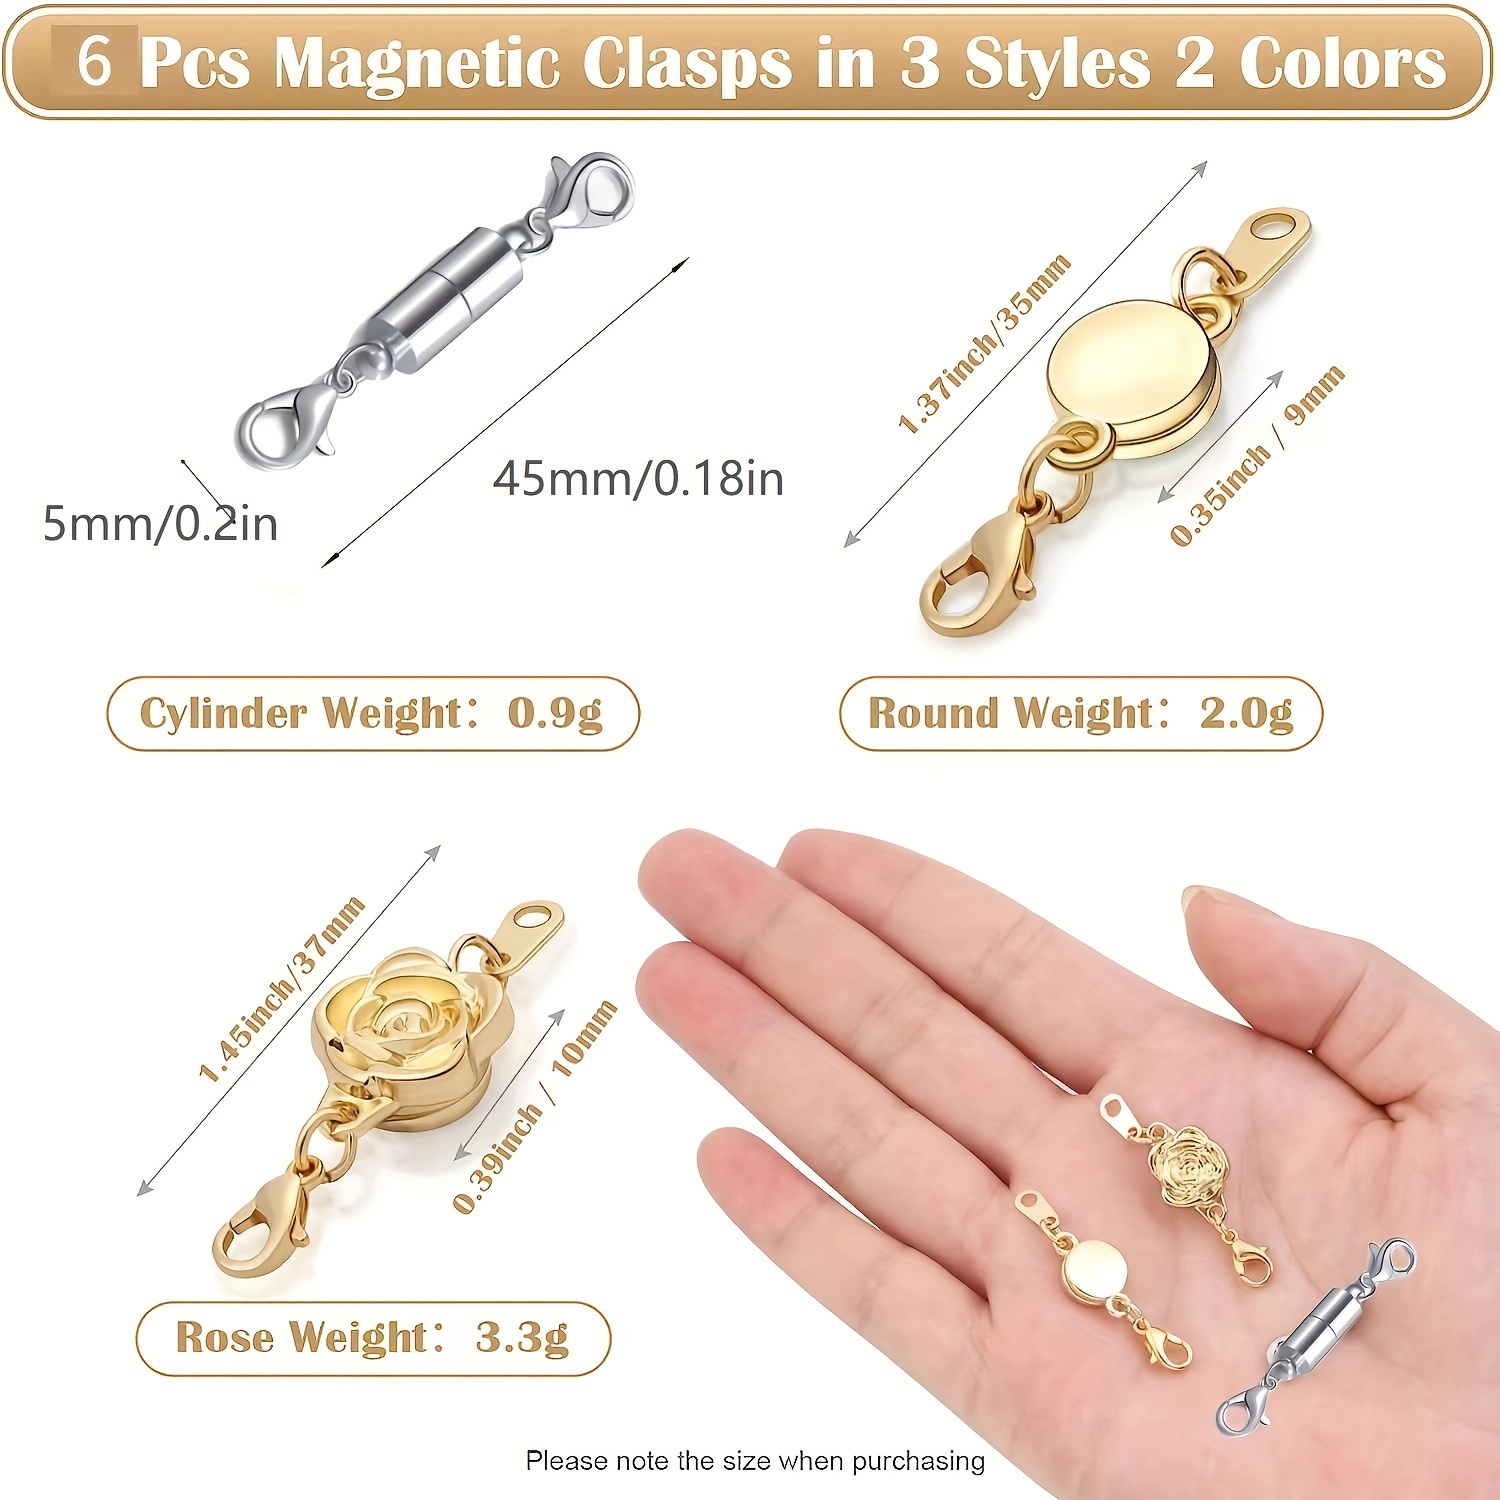 12pcs Magnetic Lobster Clasps, Locking Magnetic Jewelry Clasp, Round Necklace Clasp Closures Bracelet Extender, Magnetic Locking Clasps Connector for